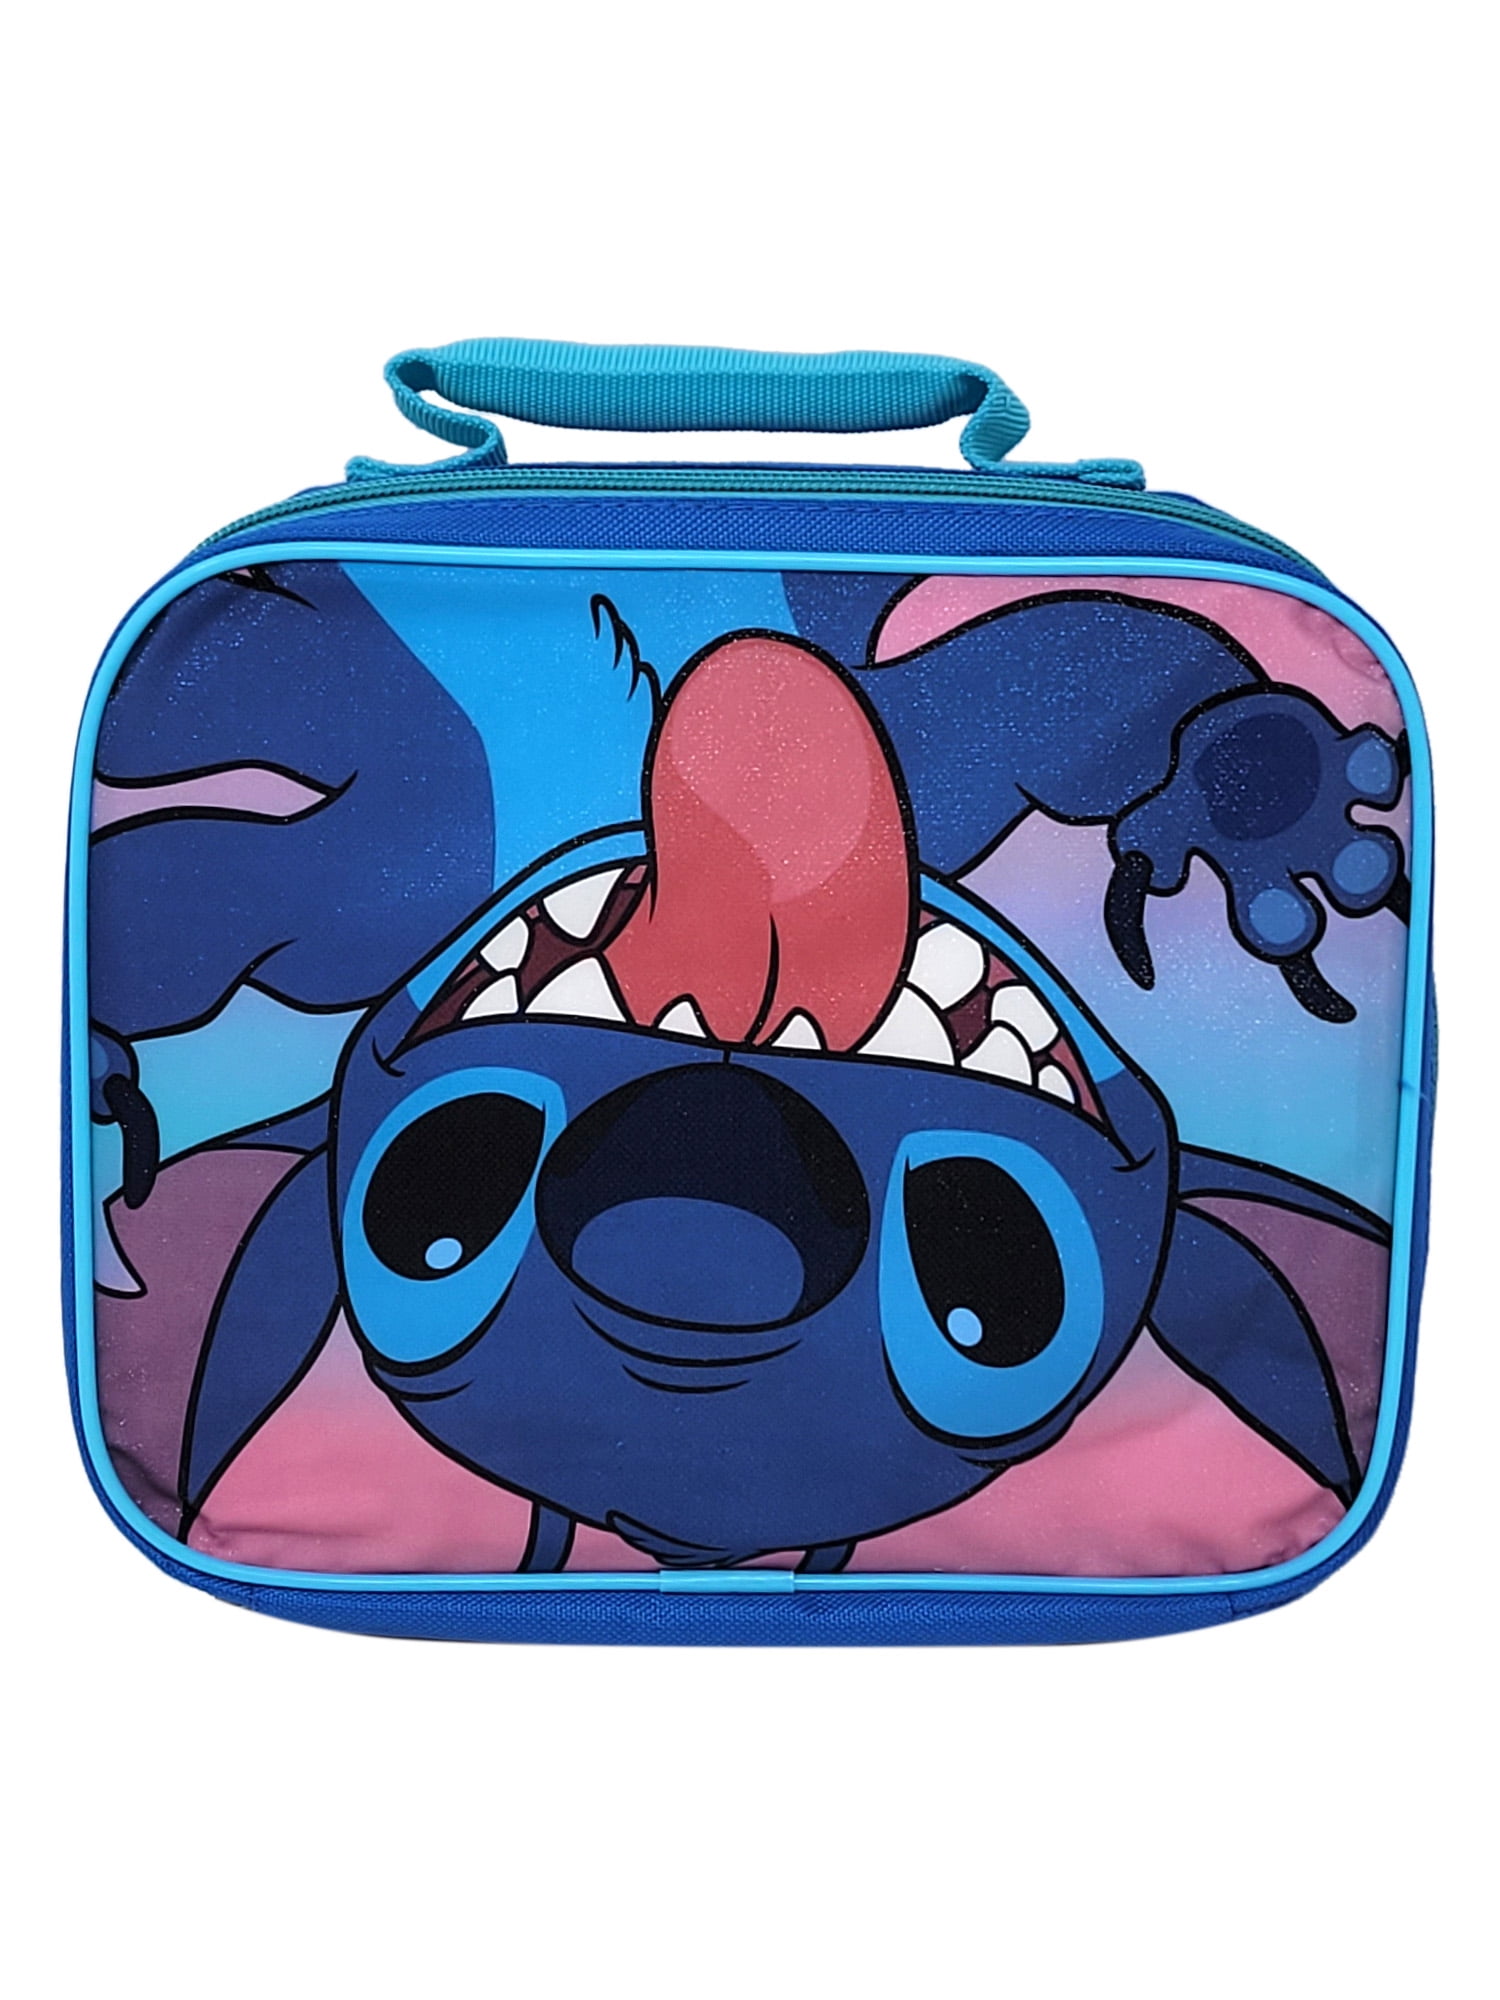 Disney Stitch and Scrump Bento Lunch Box 2 Layers w/ Tableware Blue  Inspired by You.